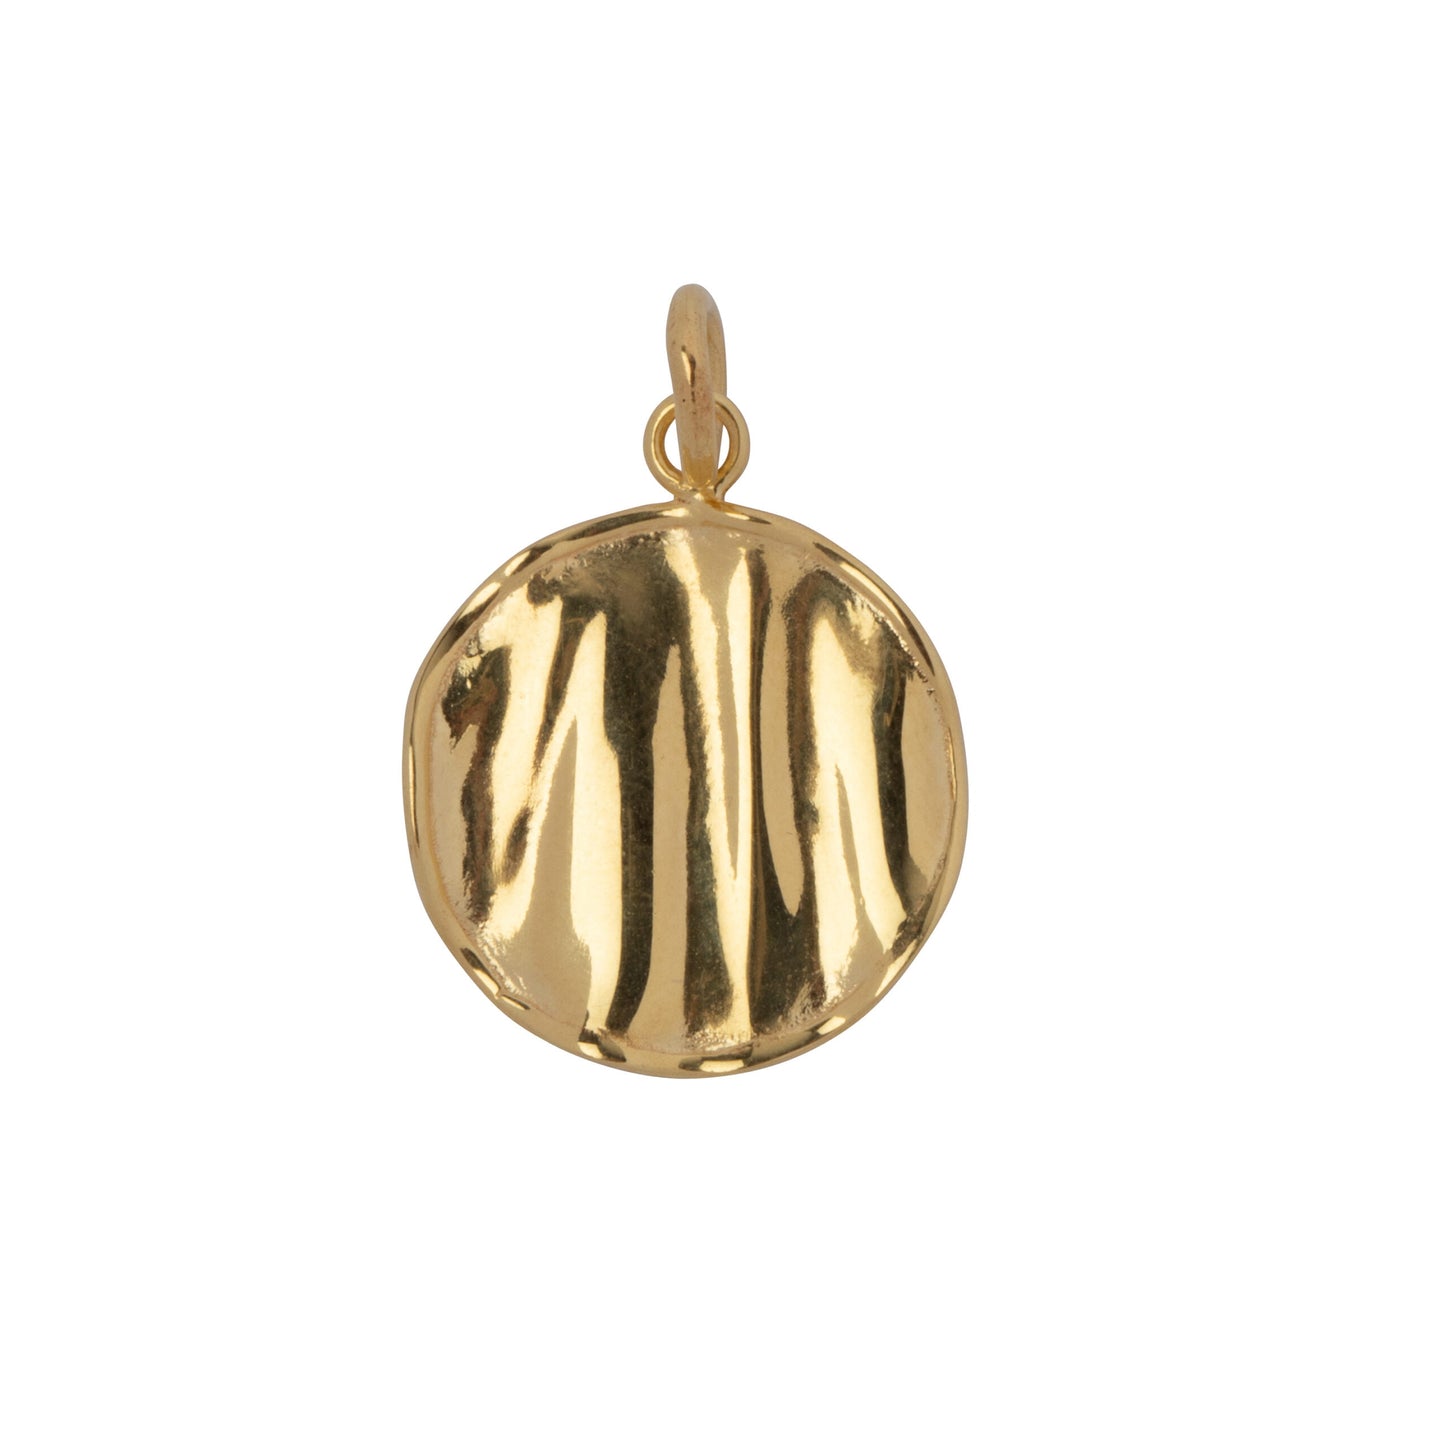 BETTY BOGAERS Big Round Shiny Charm Gold Plated - S. LABELS